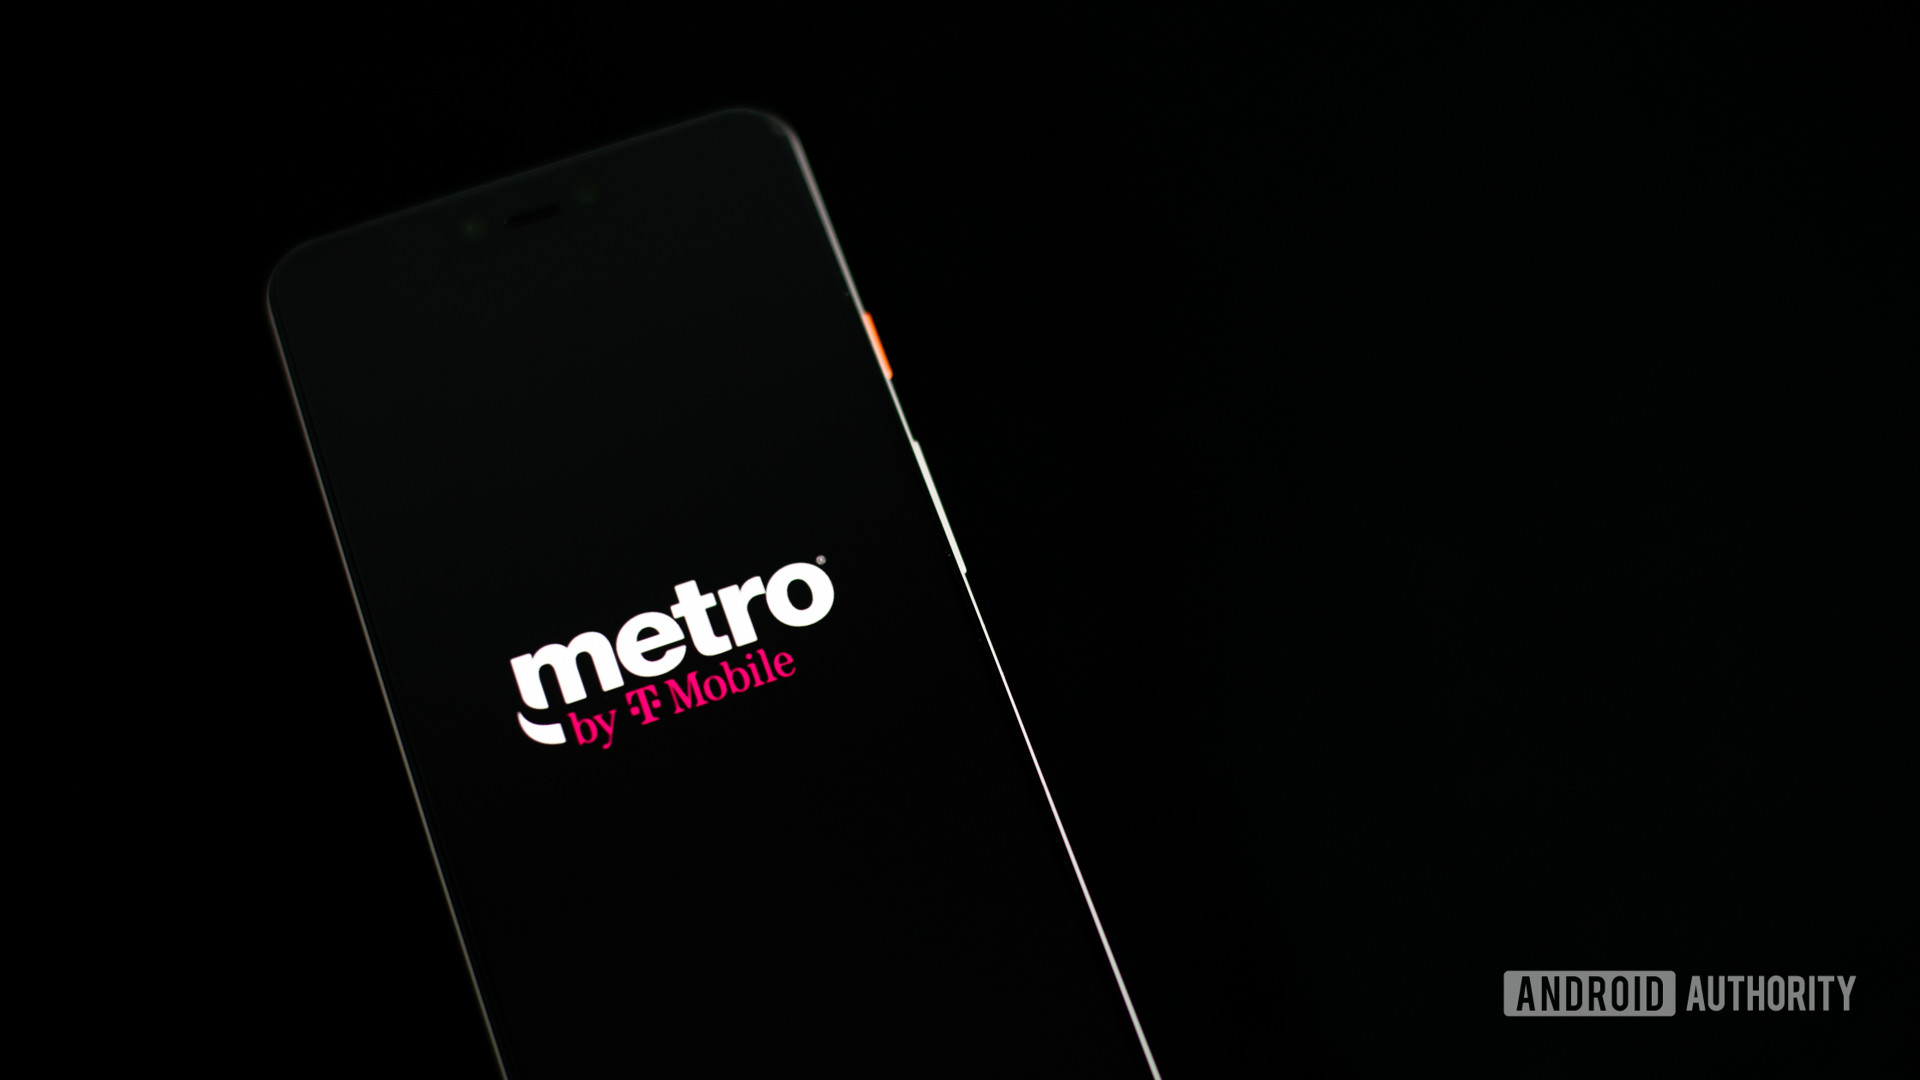 Metro By T Mobile Buyer's Guide: Plans, Perks, And More